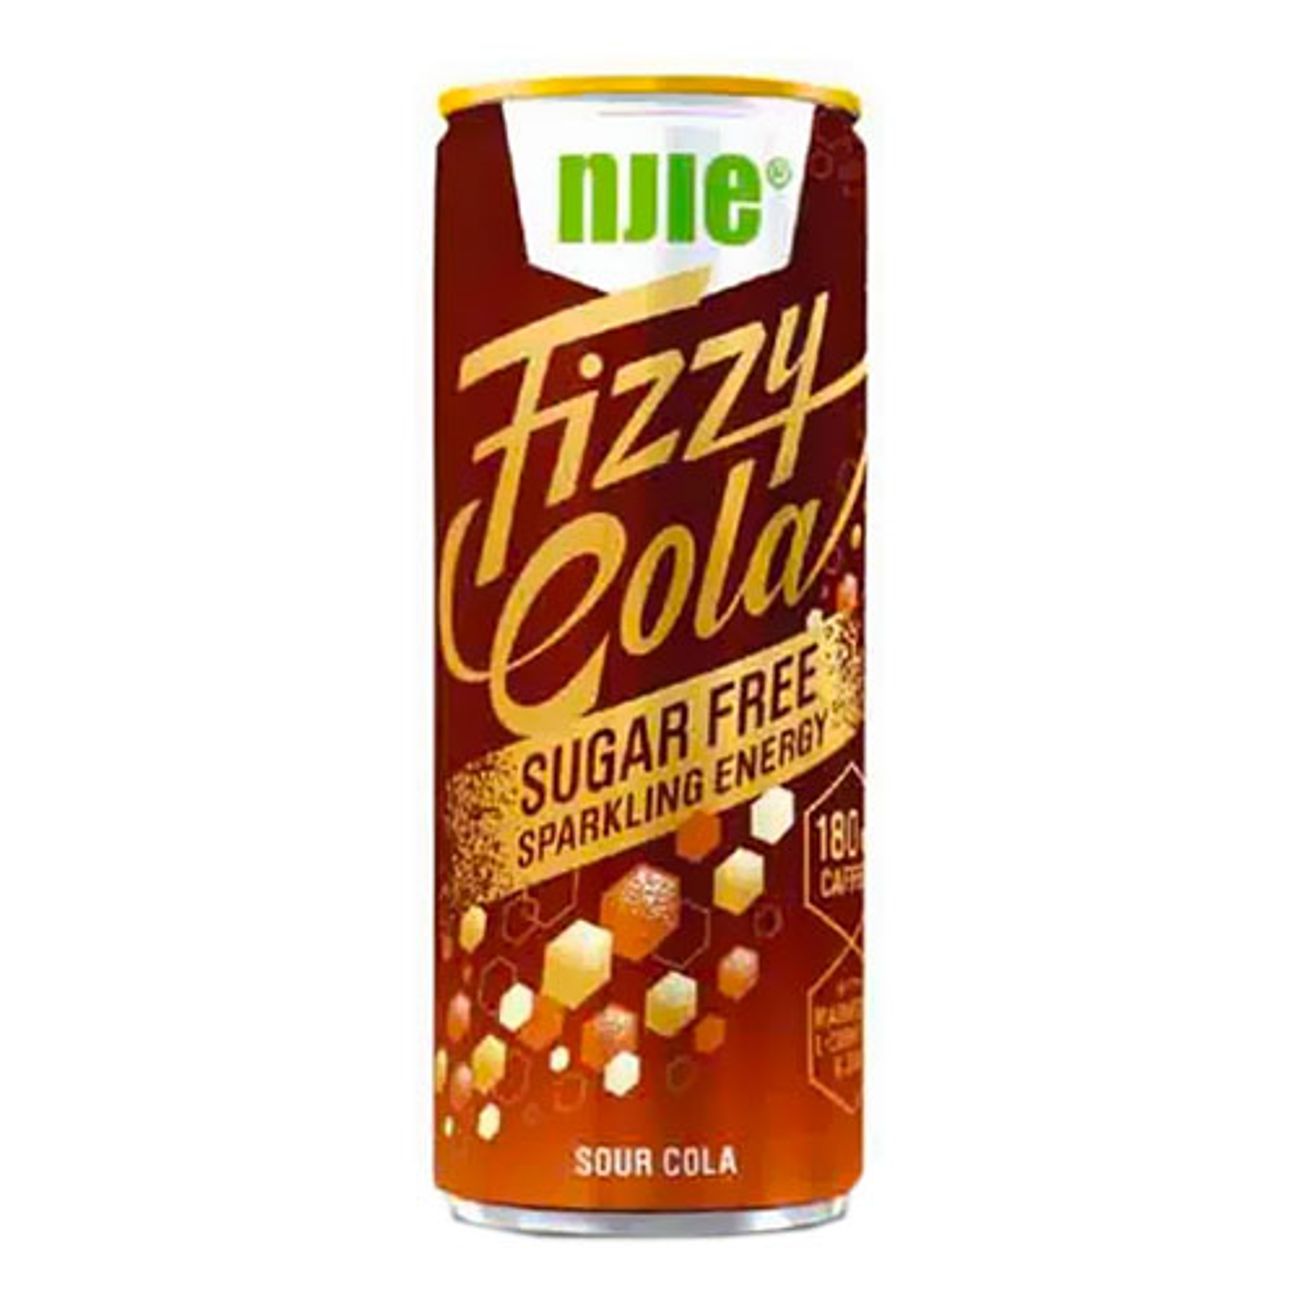 njie-energy-fizzy-cola-1